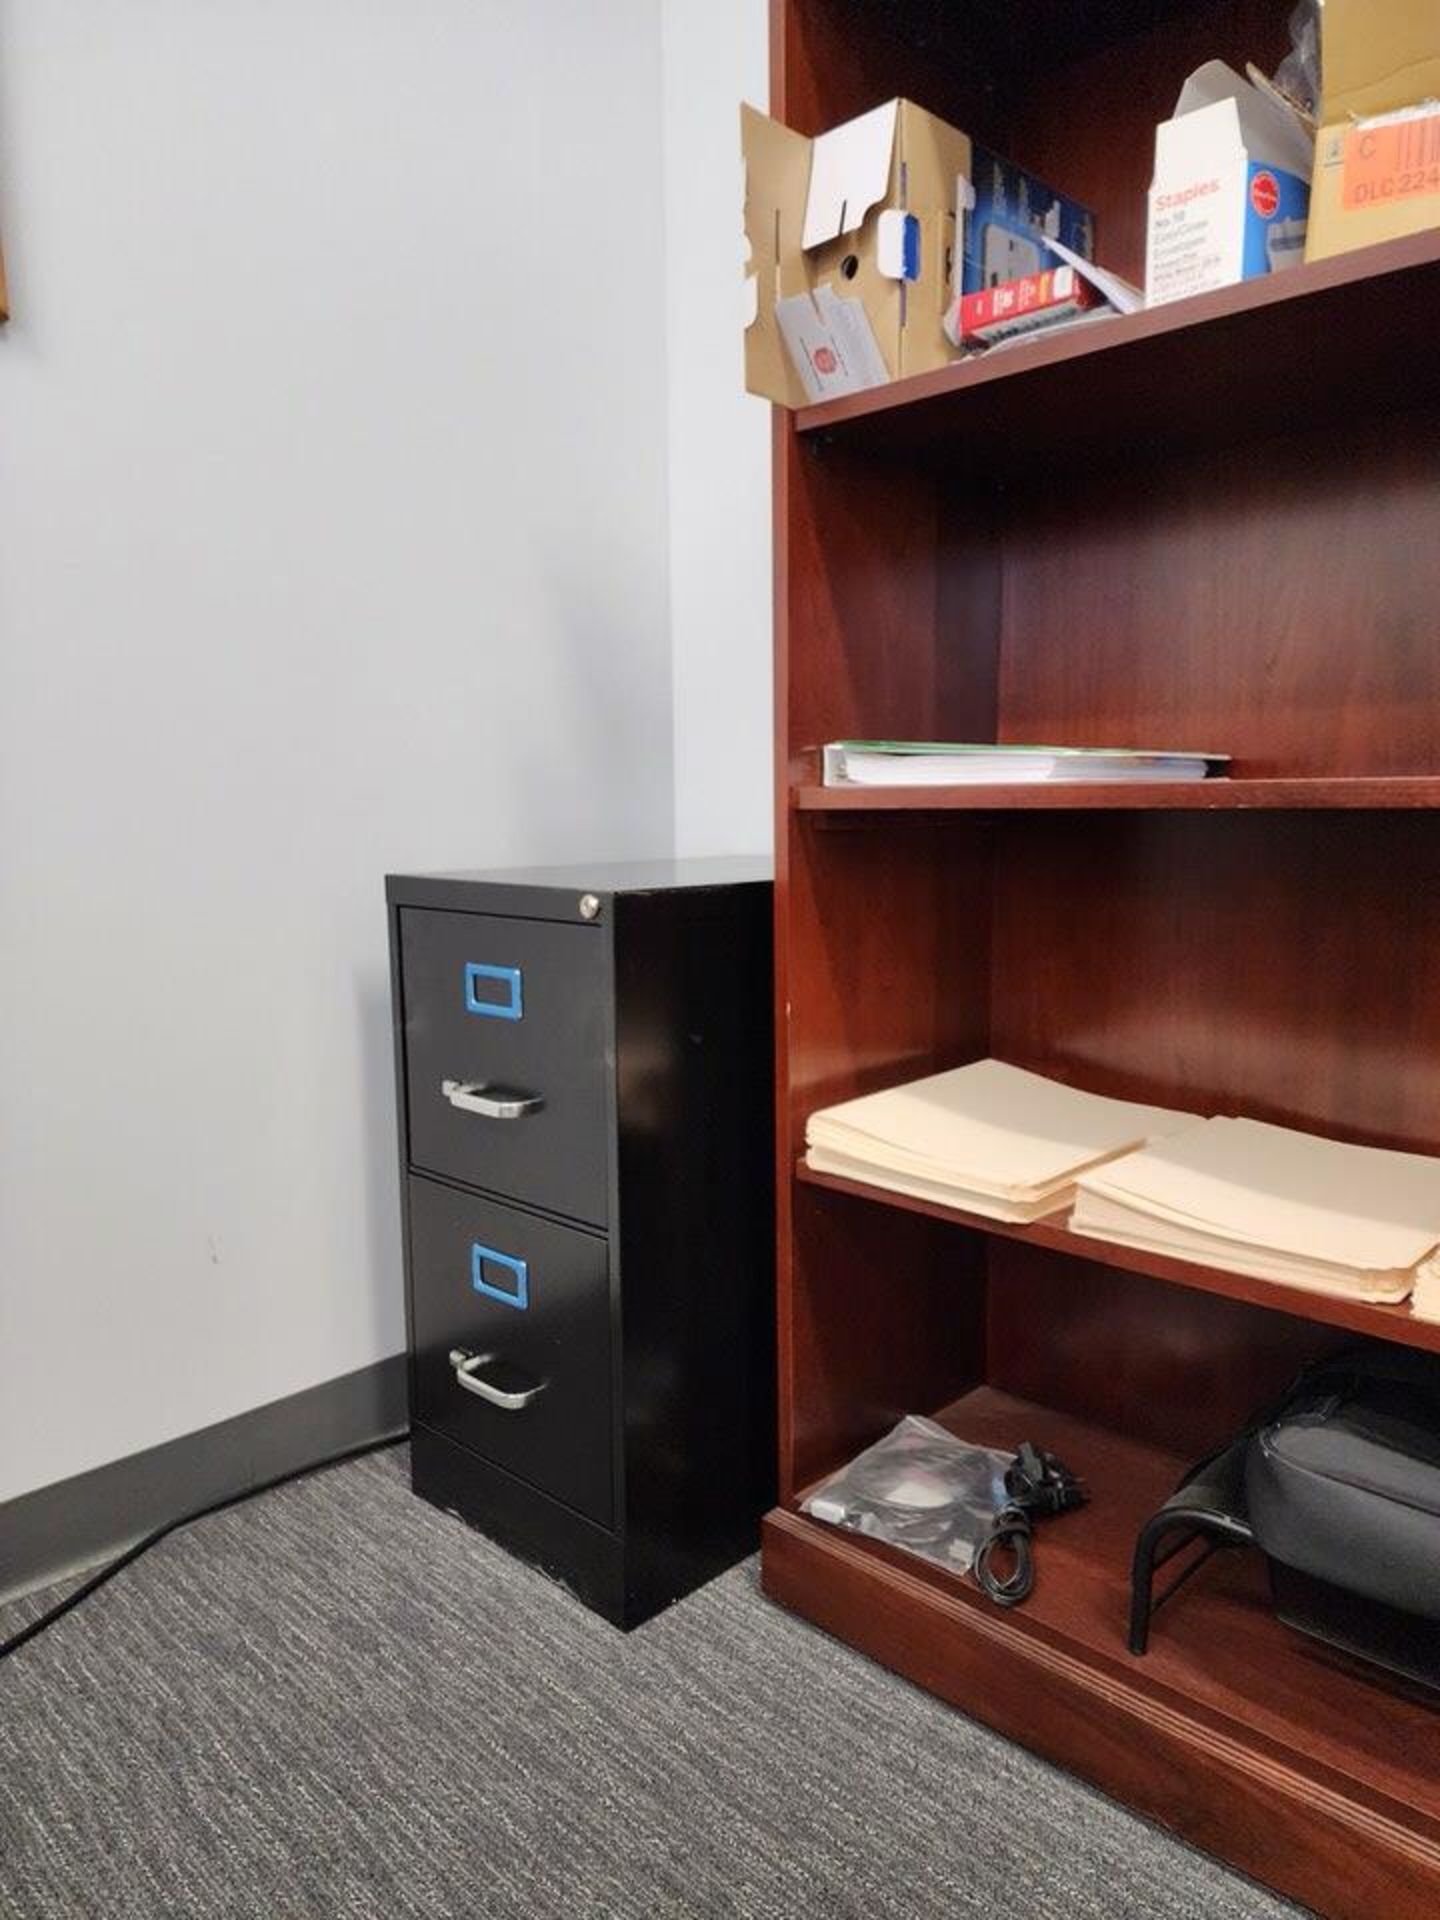 Office Furniture To Include But Not Limited To: Desk, Monitors, Keyboard & Mouse, etc. - Image 6 of 11